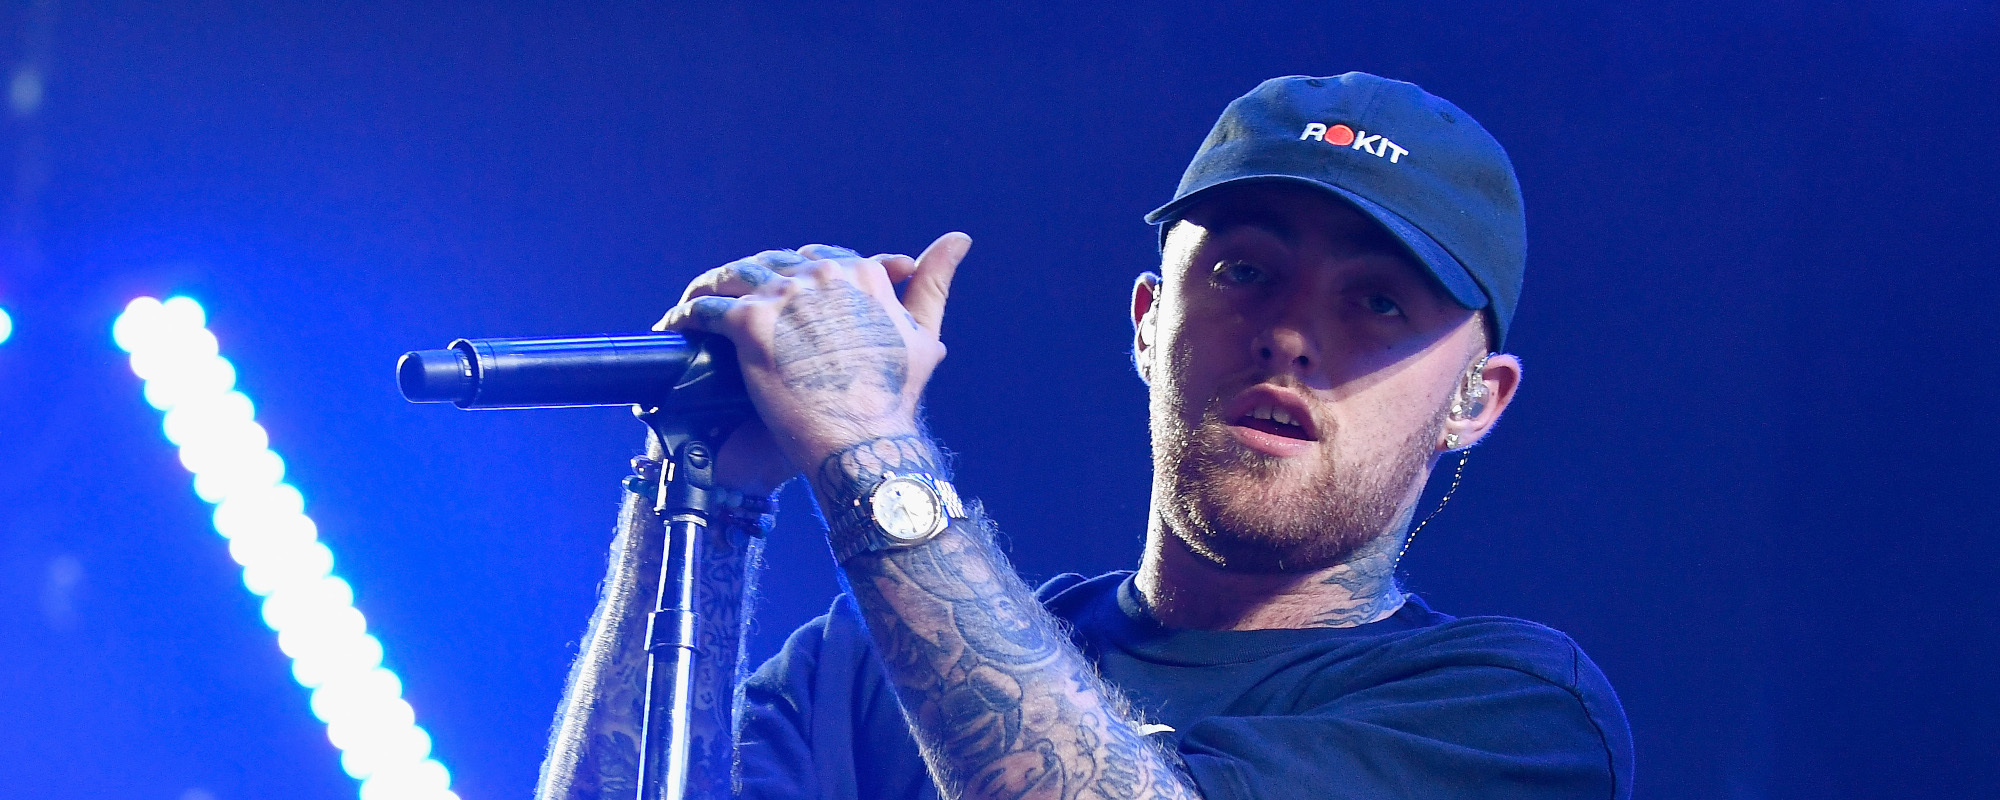 Mac Miller’s Estate Releases 10-Year Anniversary Edition of ‘Watching Movies’